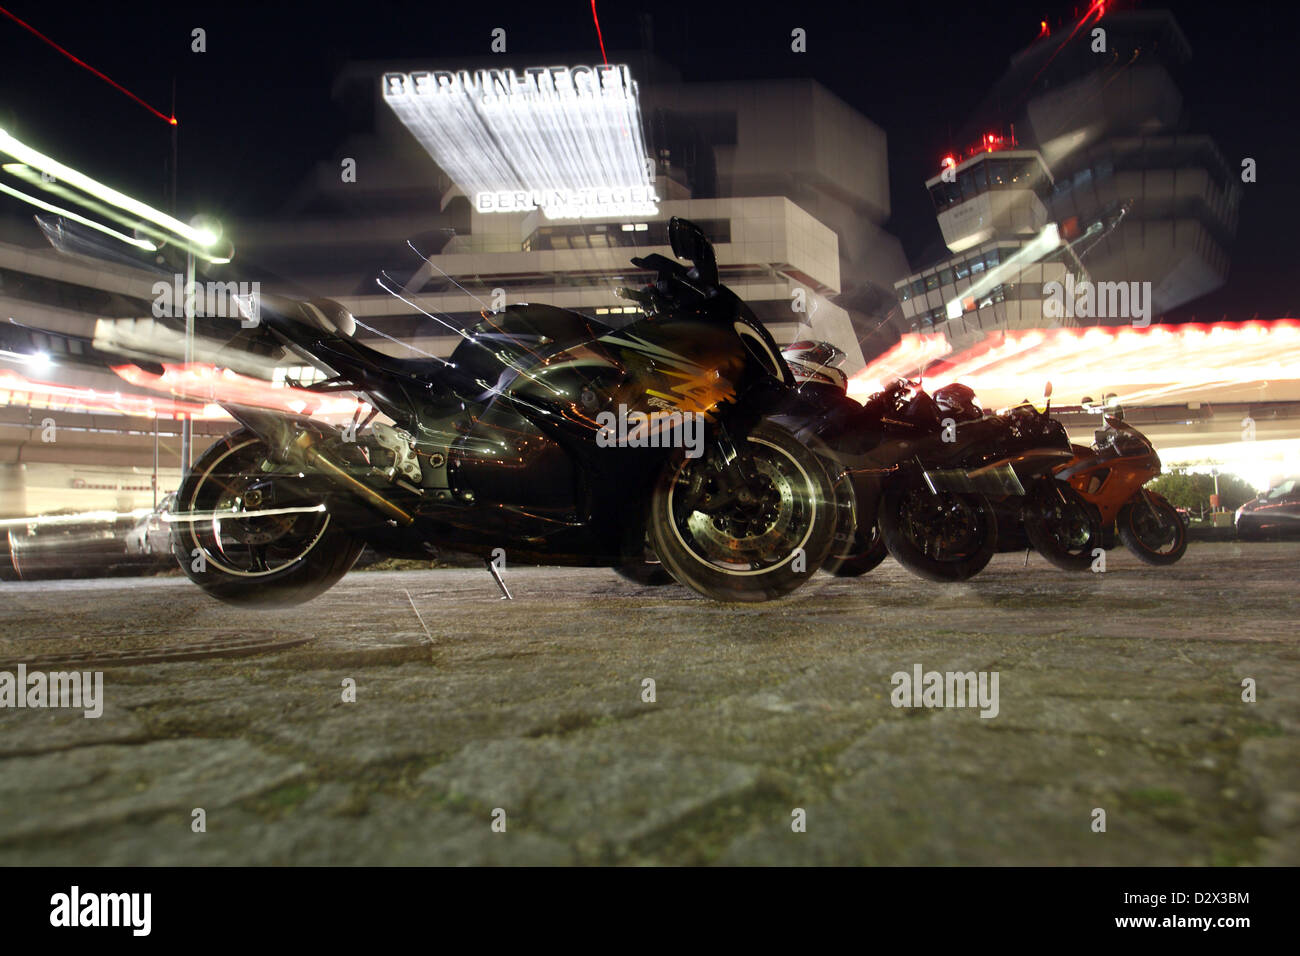 Berlin, Germany, motorcycles before the Tegel Airport Stock Photo